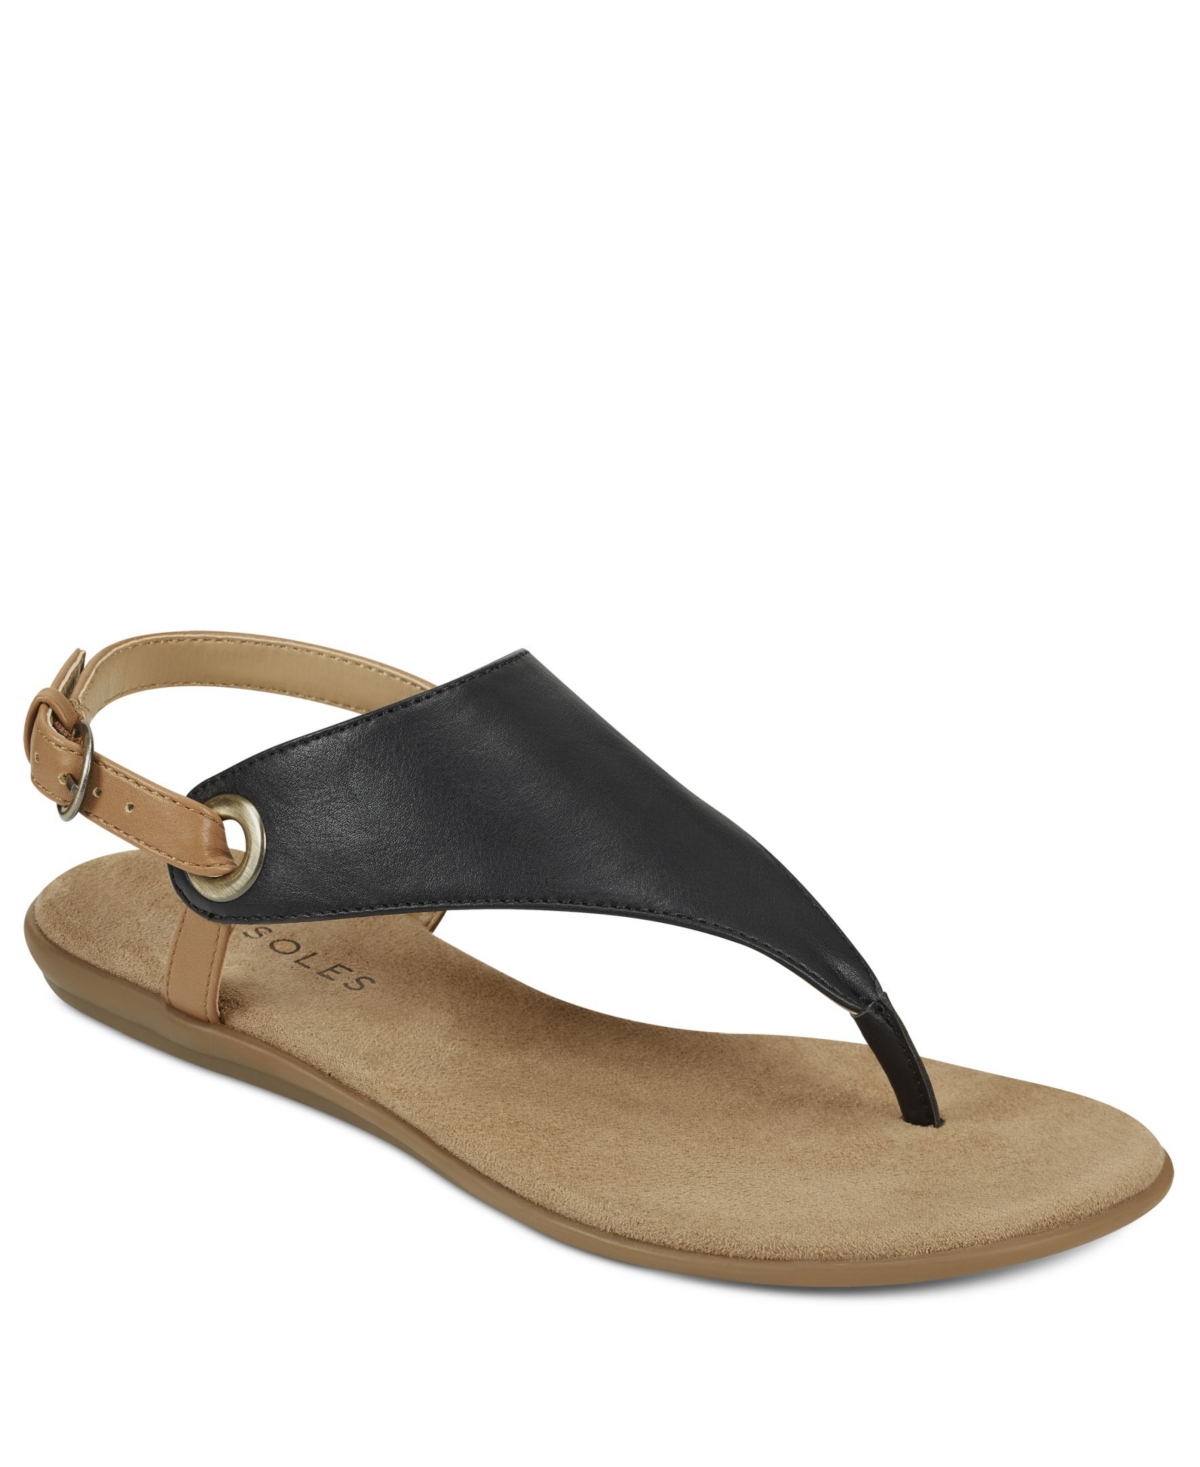 UPC 887039872576 product image for Women's In Conchlusion Casual Sandals Women's Shoes | upcitemdb.com